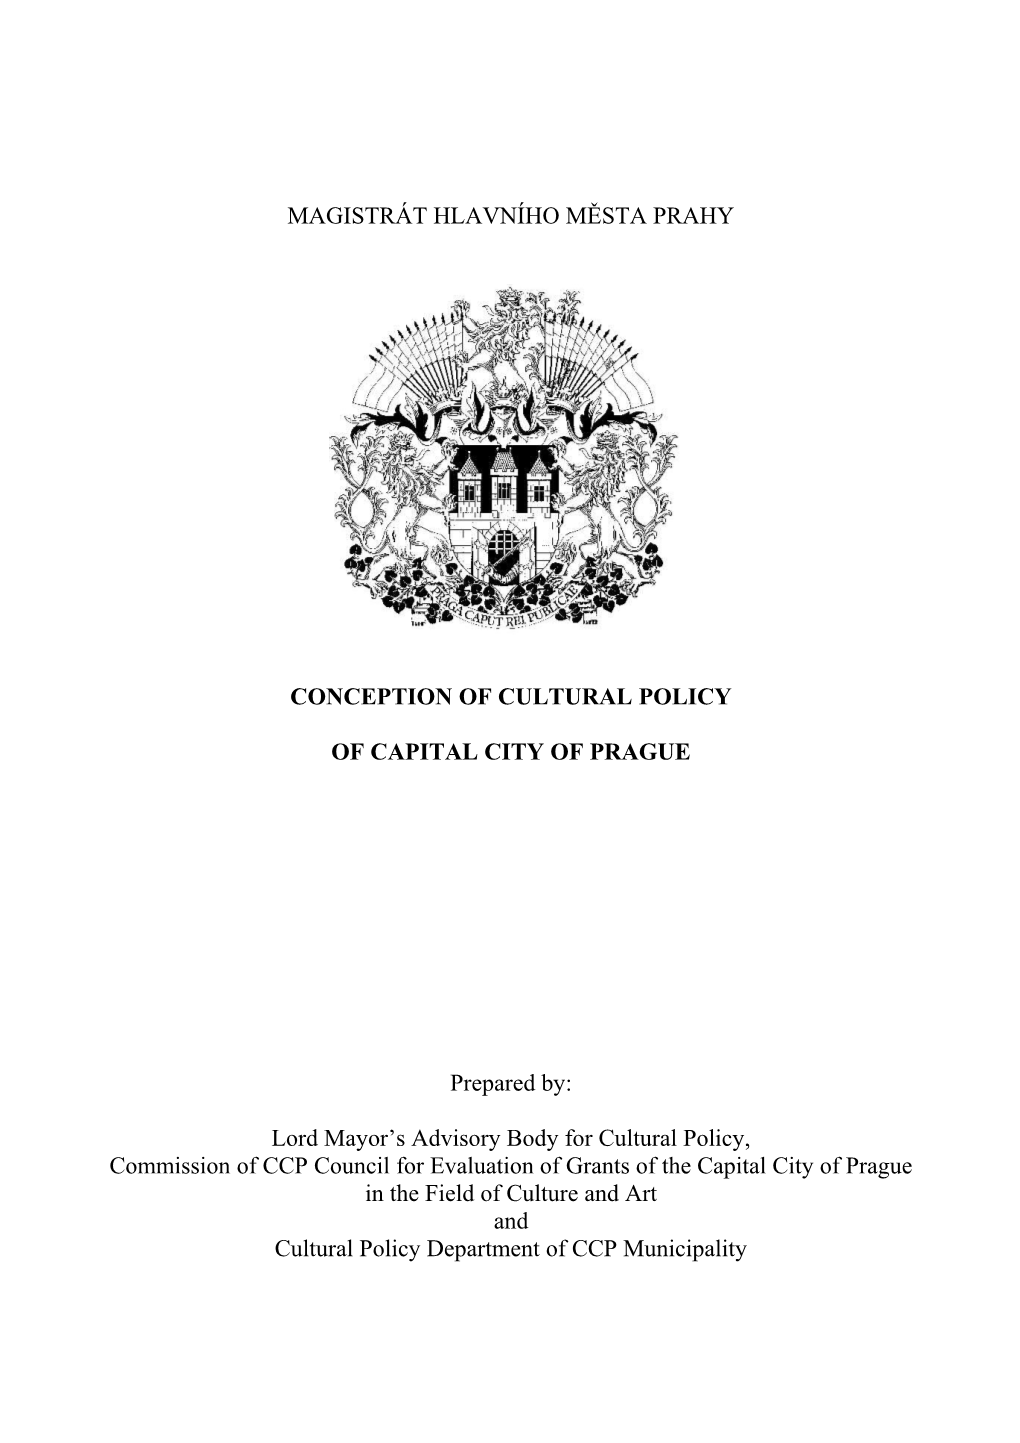 Conception of Cultural Policy of the Capital City of Prague